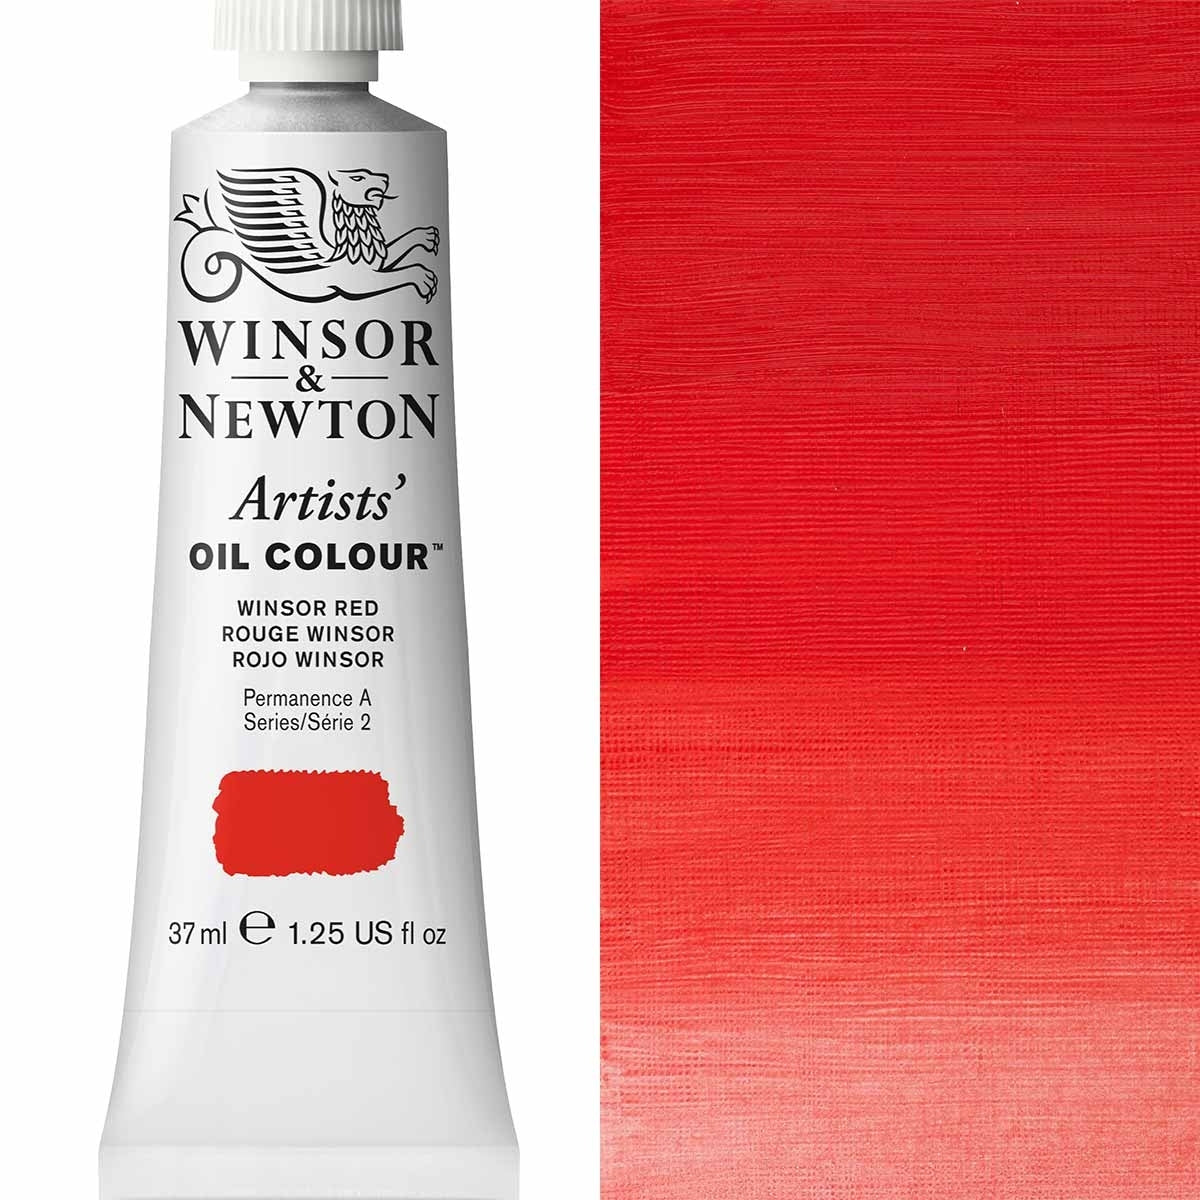 Winsor and Newton - Artists' Oil Colour - 37ml - Winsor Red